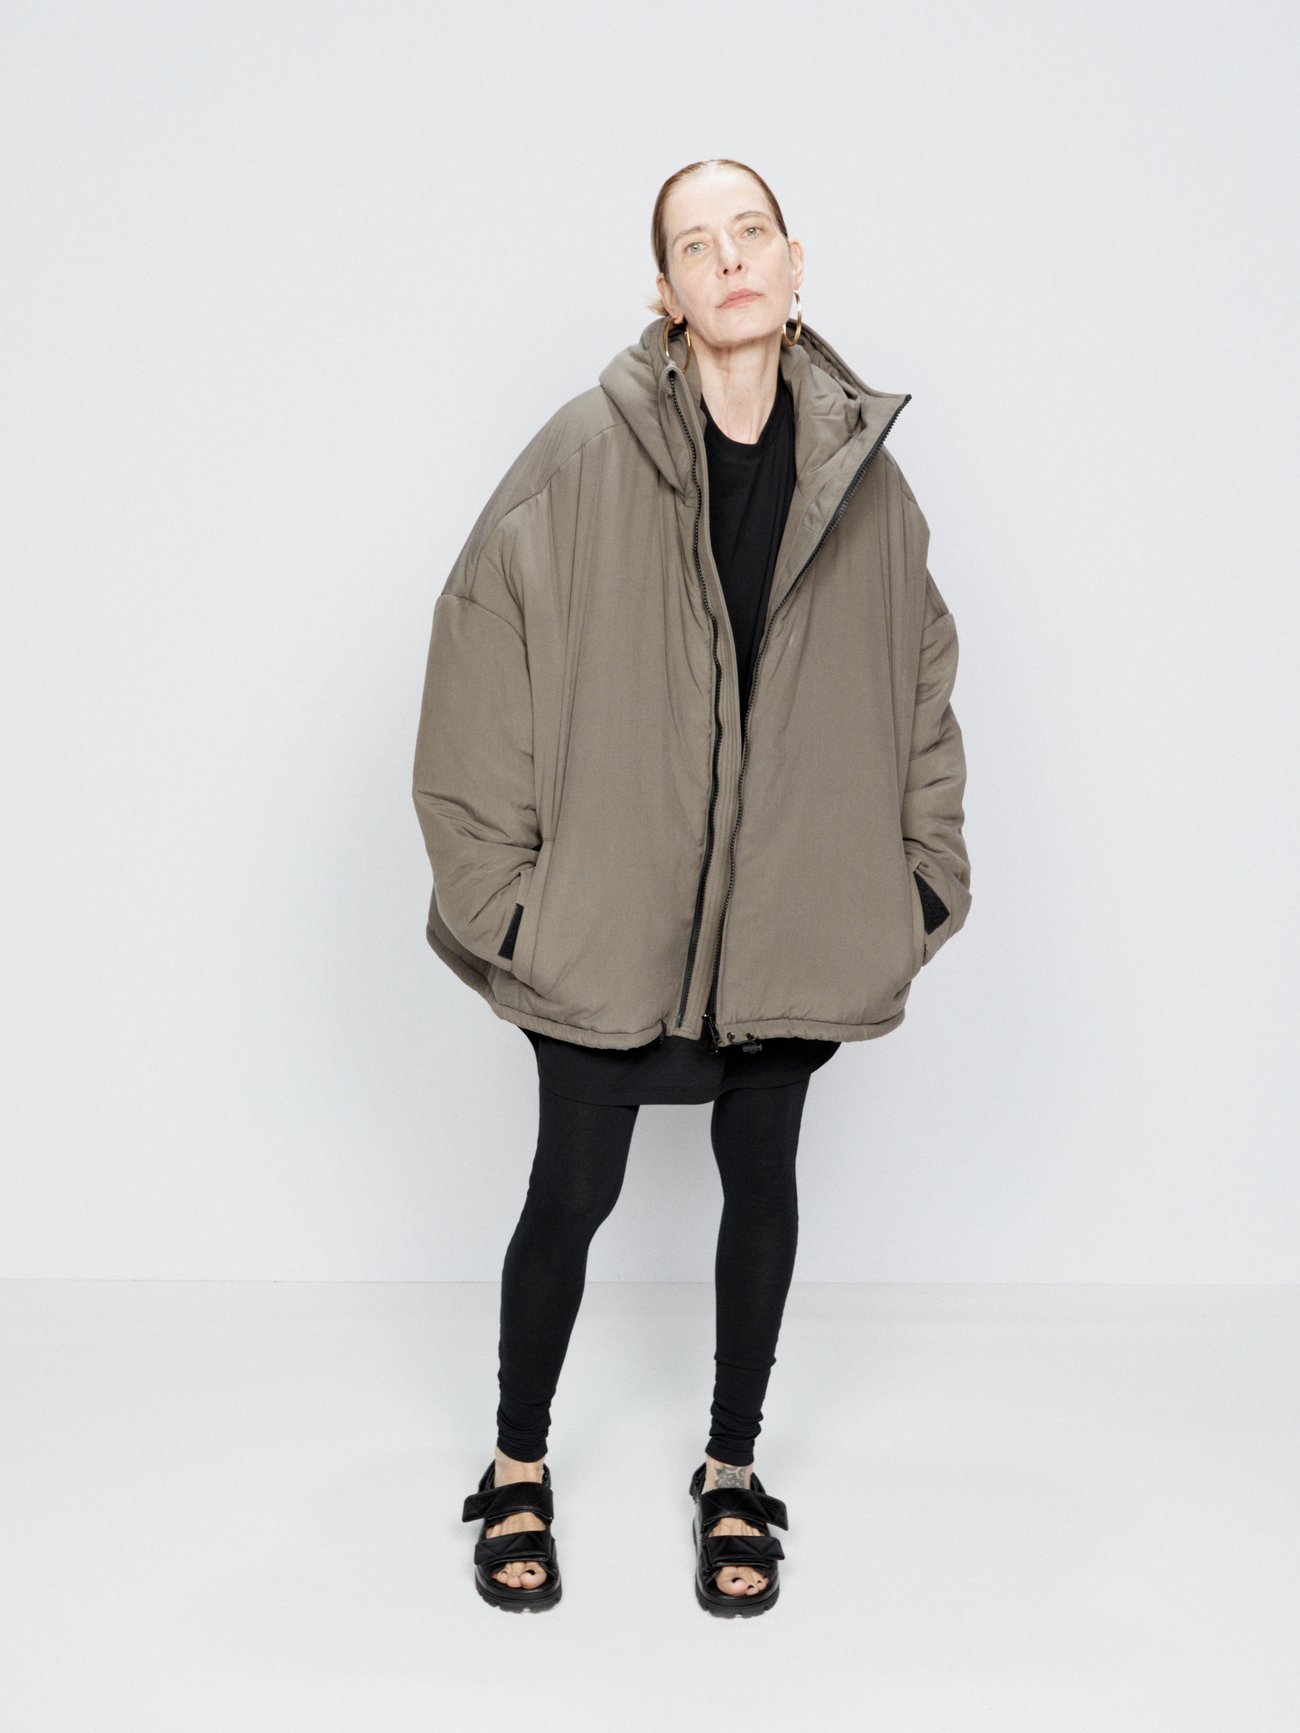 8 types of coats that never go out of style. Made from padded matte silk, Raey's khaki-green jacket has velcro cuffs, a generous hood and a black front zip.